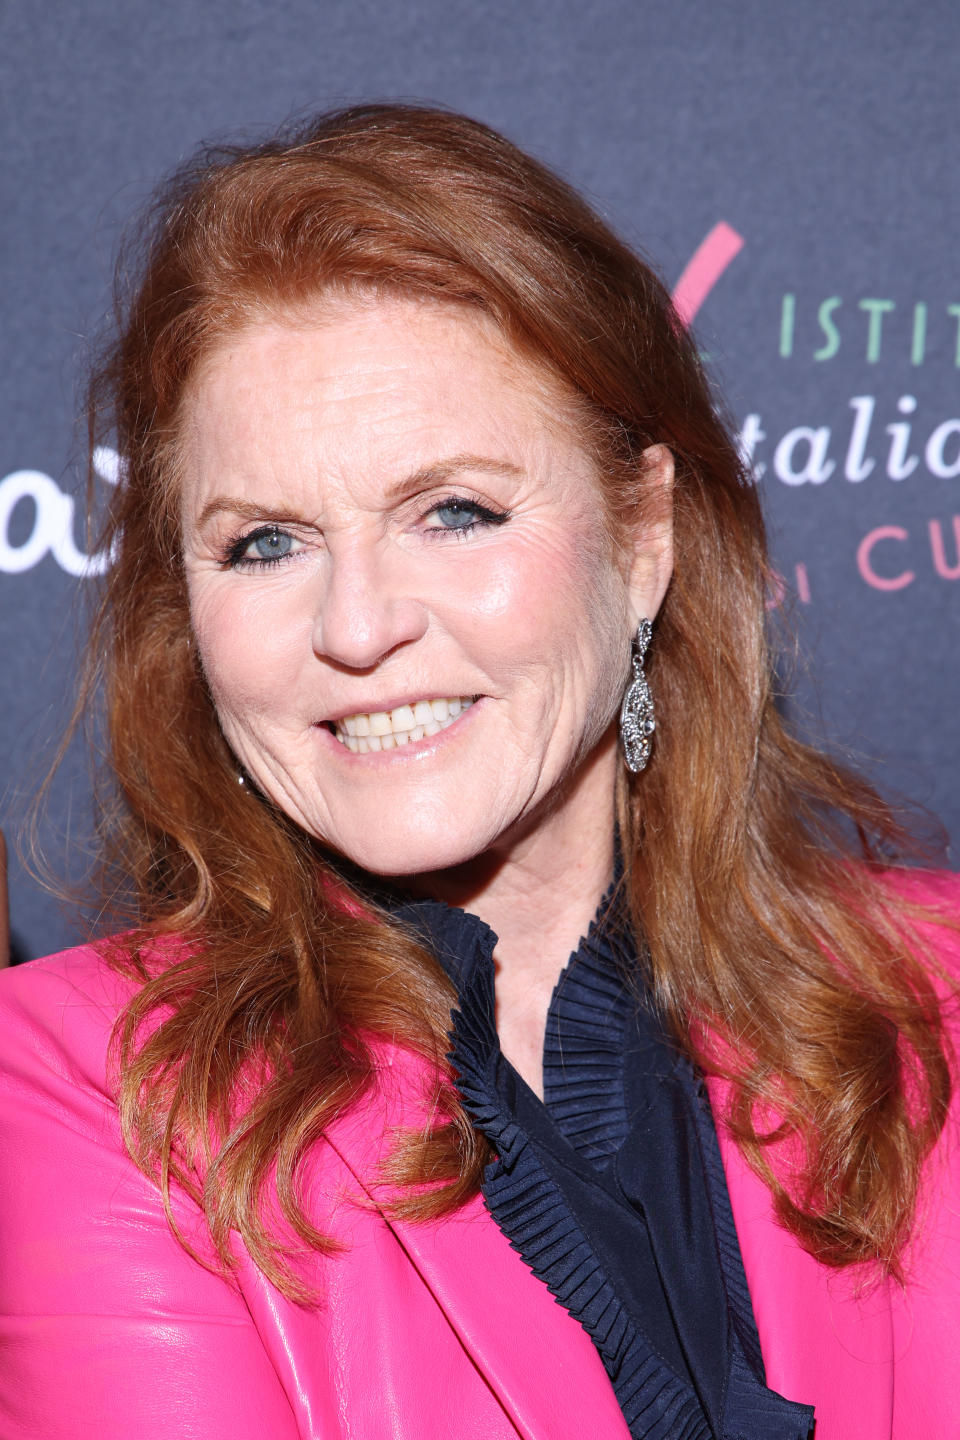 Sarah Ferguson has revealed she was diagnosed with breast cancer following a routine mammogram. (Getty Images)